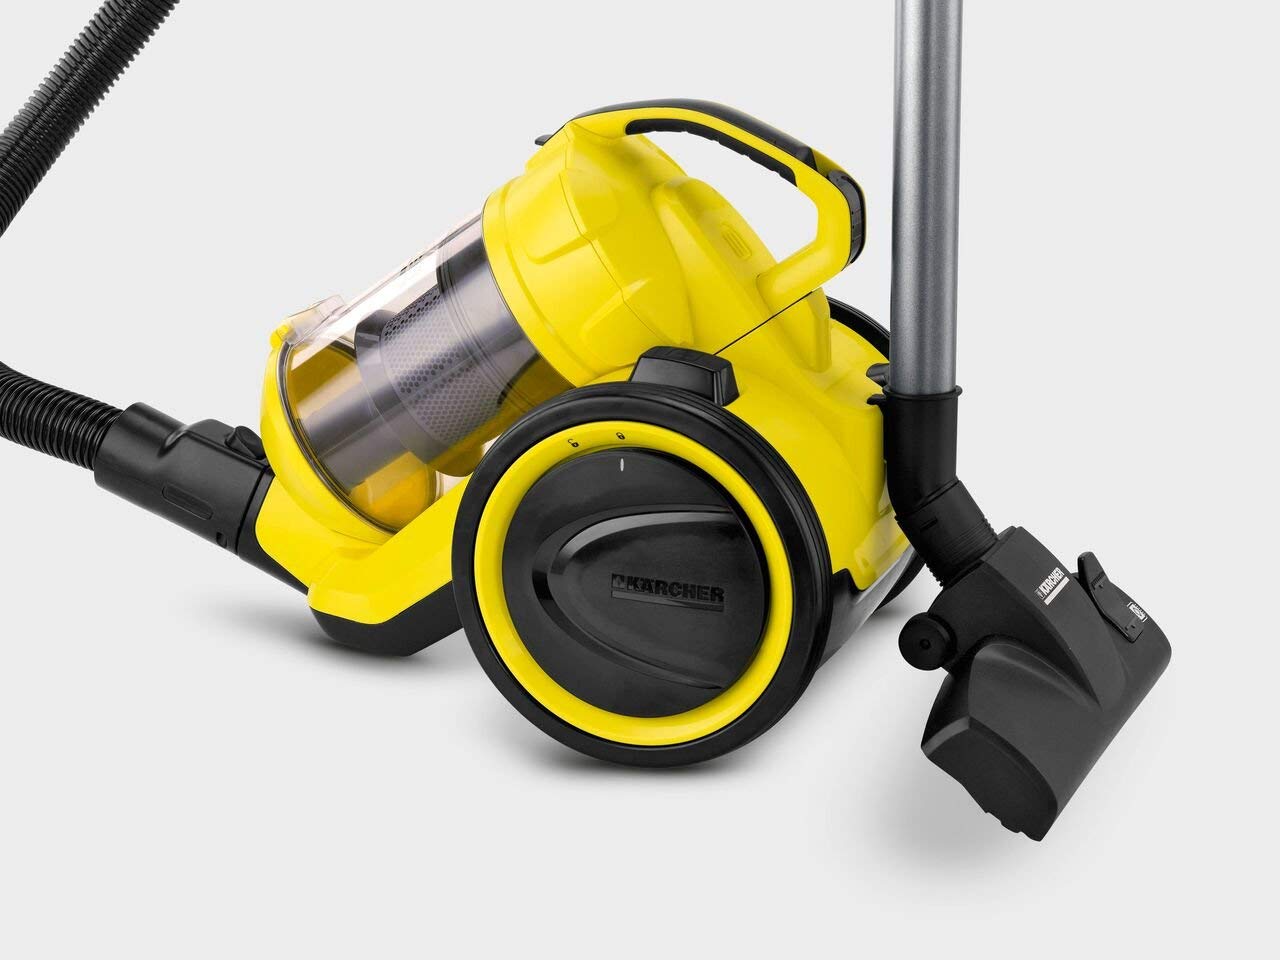 Karcher VC3 Plus Bagless Vacuum Cleaner, Powerful Suction for Home Cleaning, Compact & Lightweight Design, Ideal for Soft & Hard Surfaces, Yellow